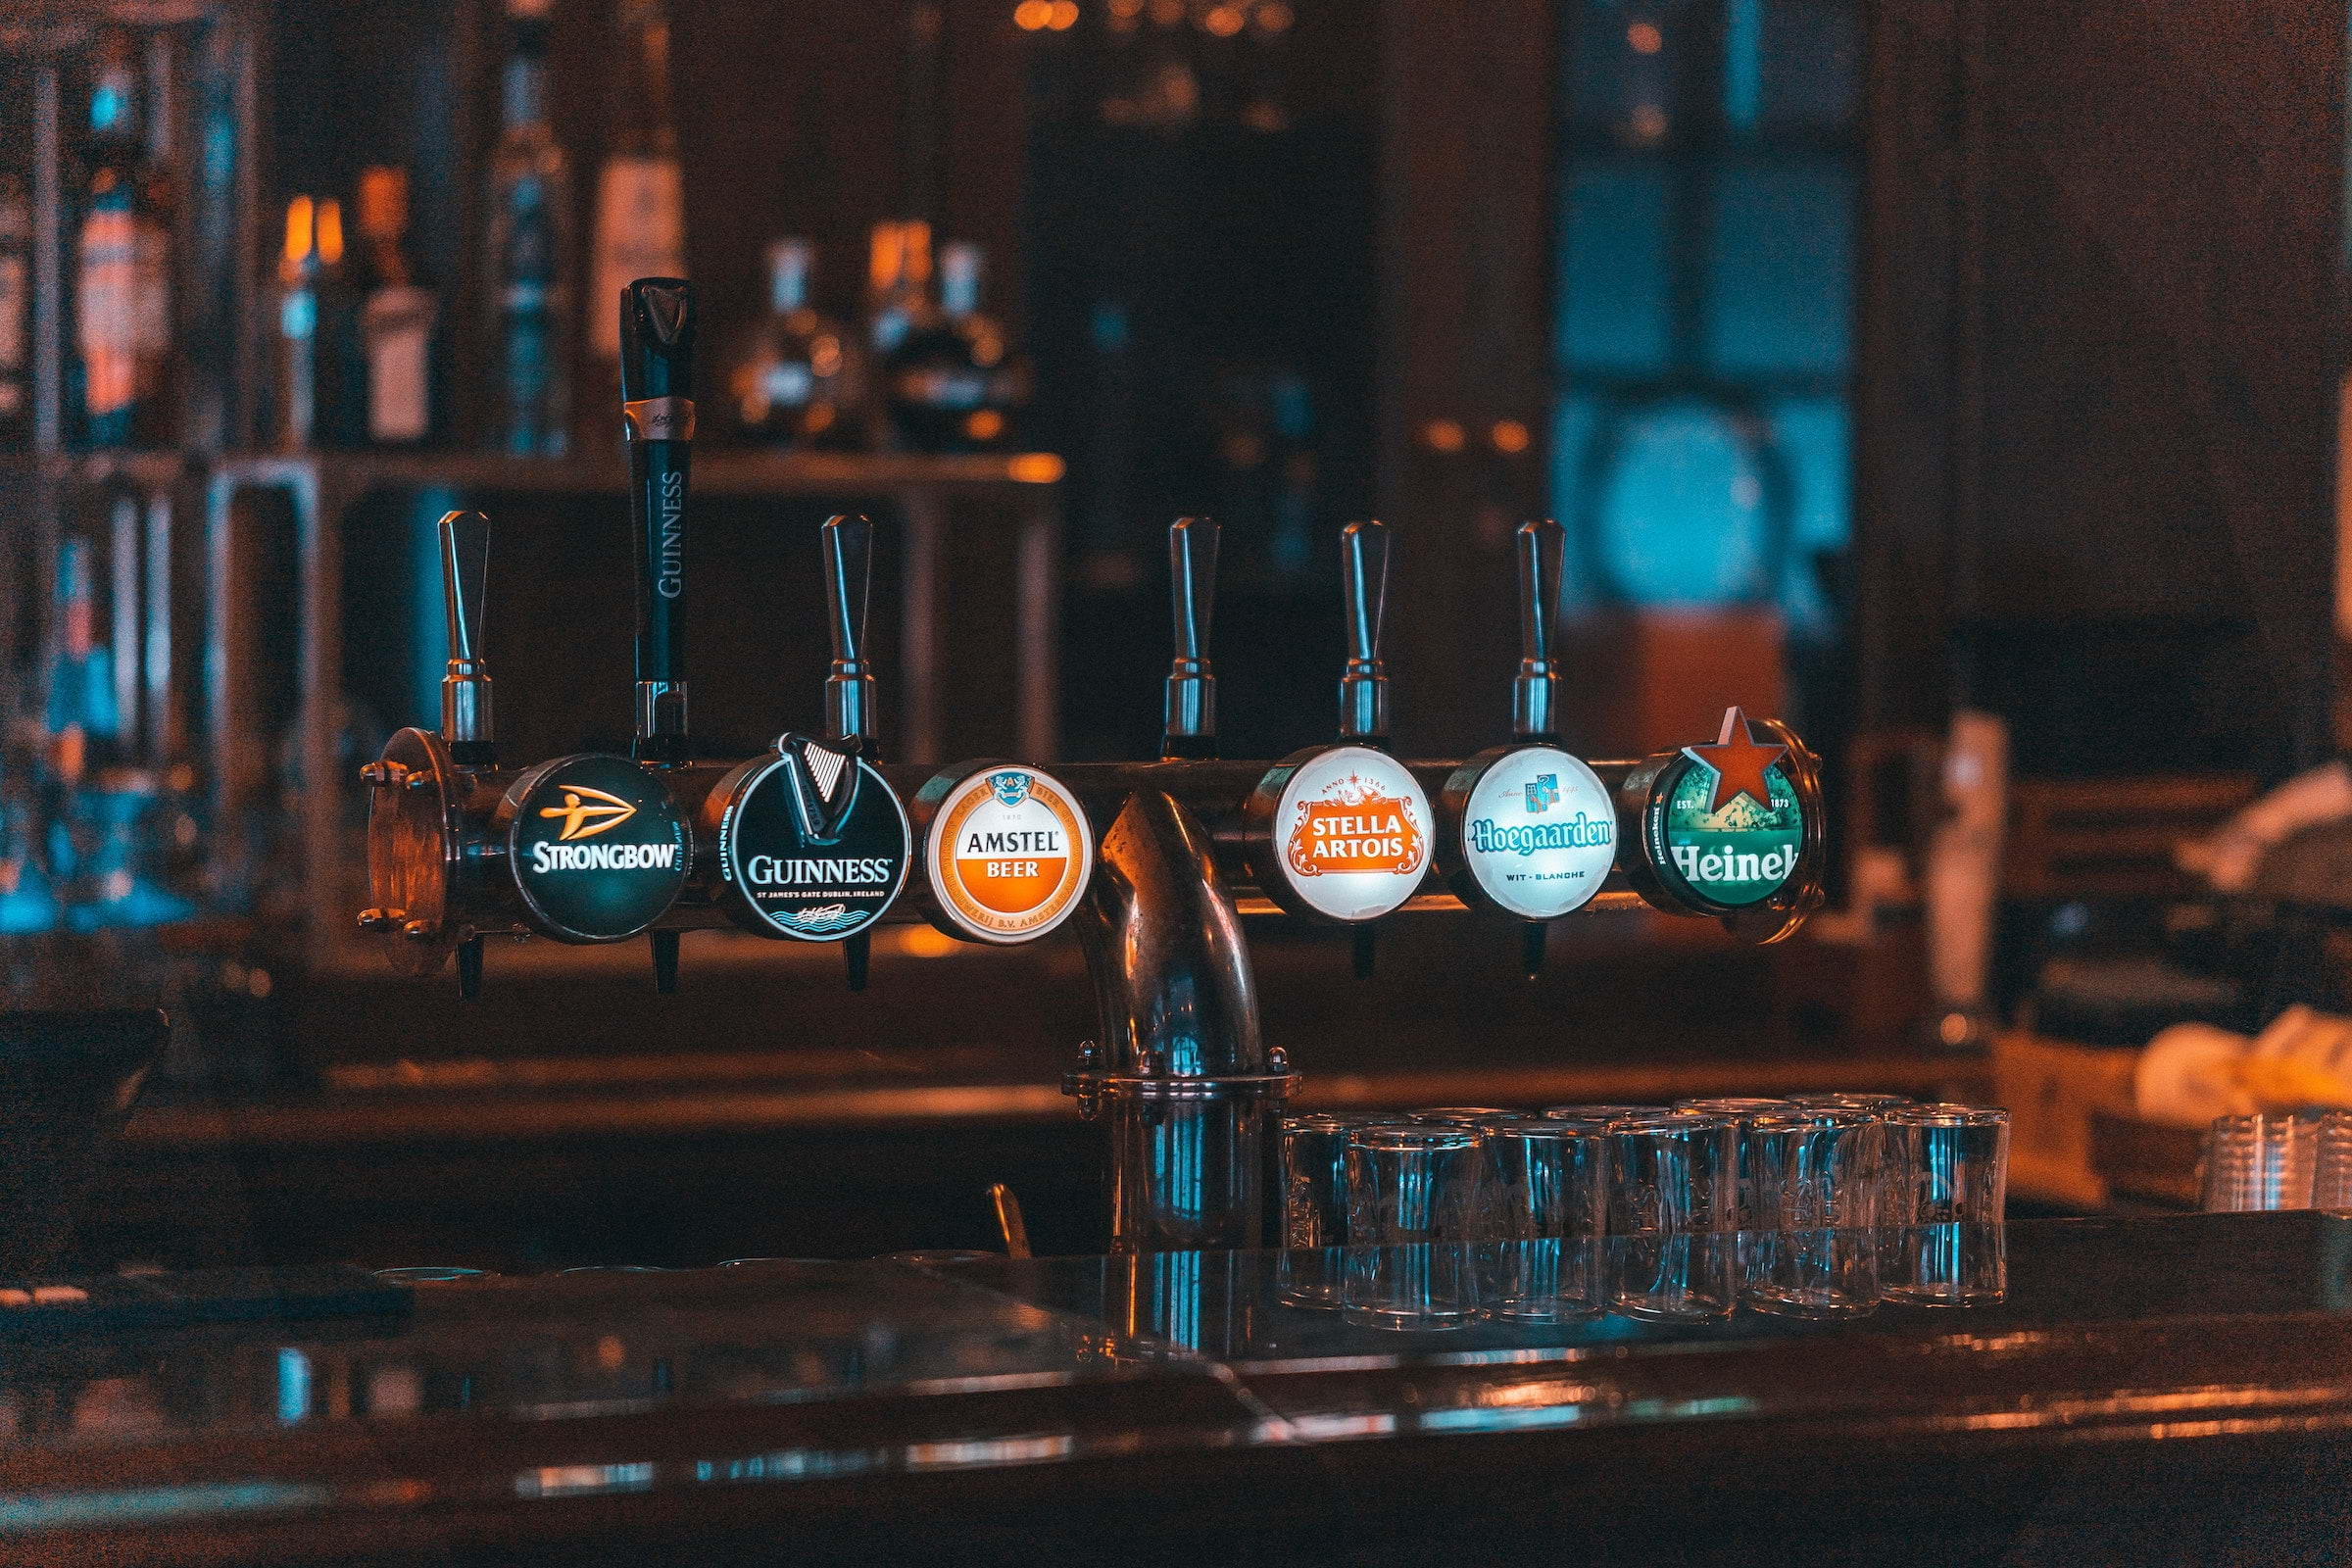 The best pubs in the Northern Quarter